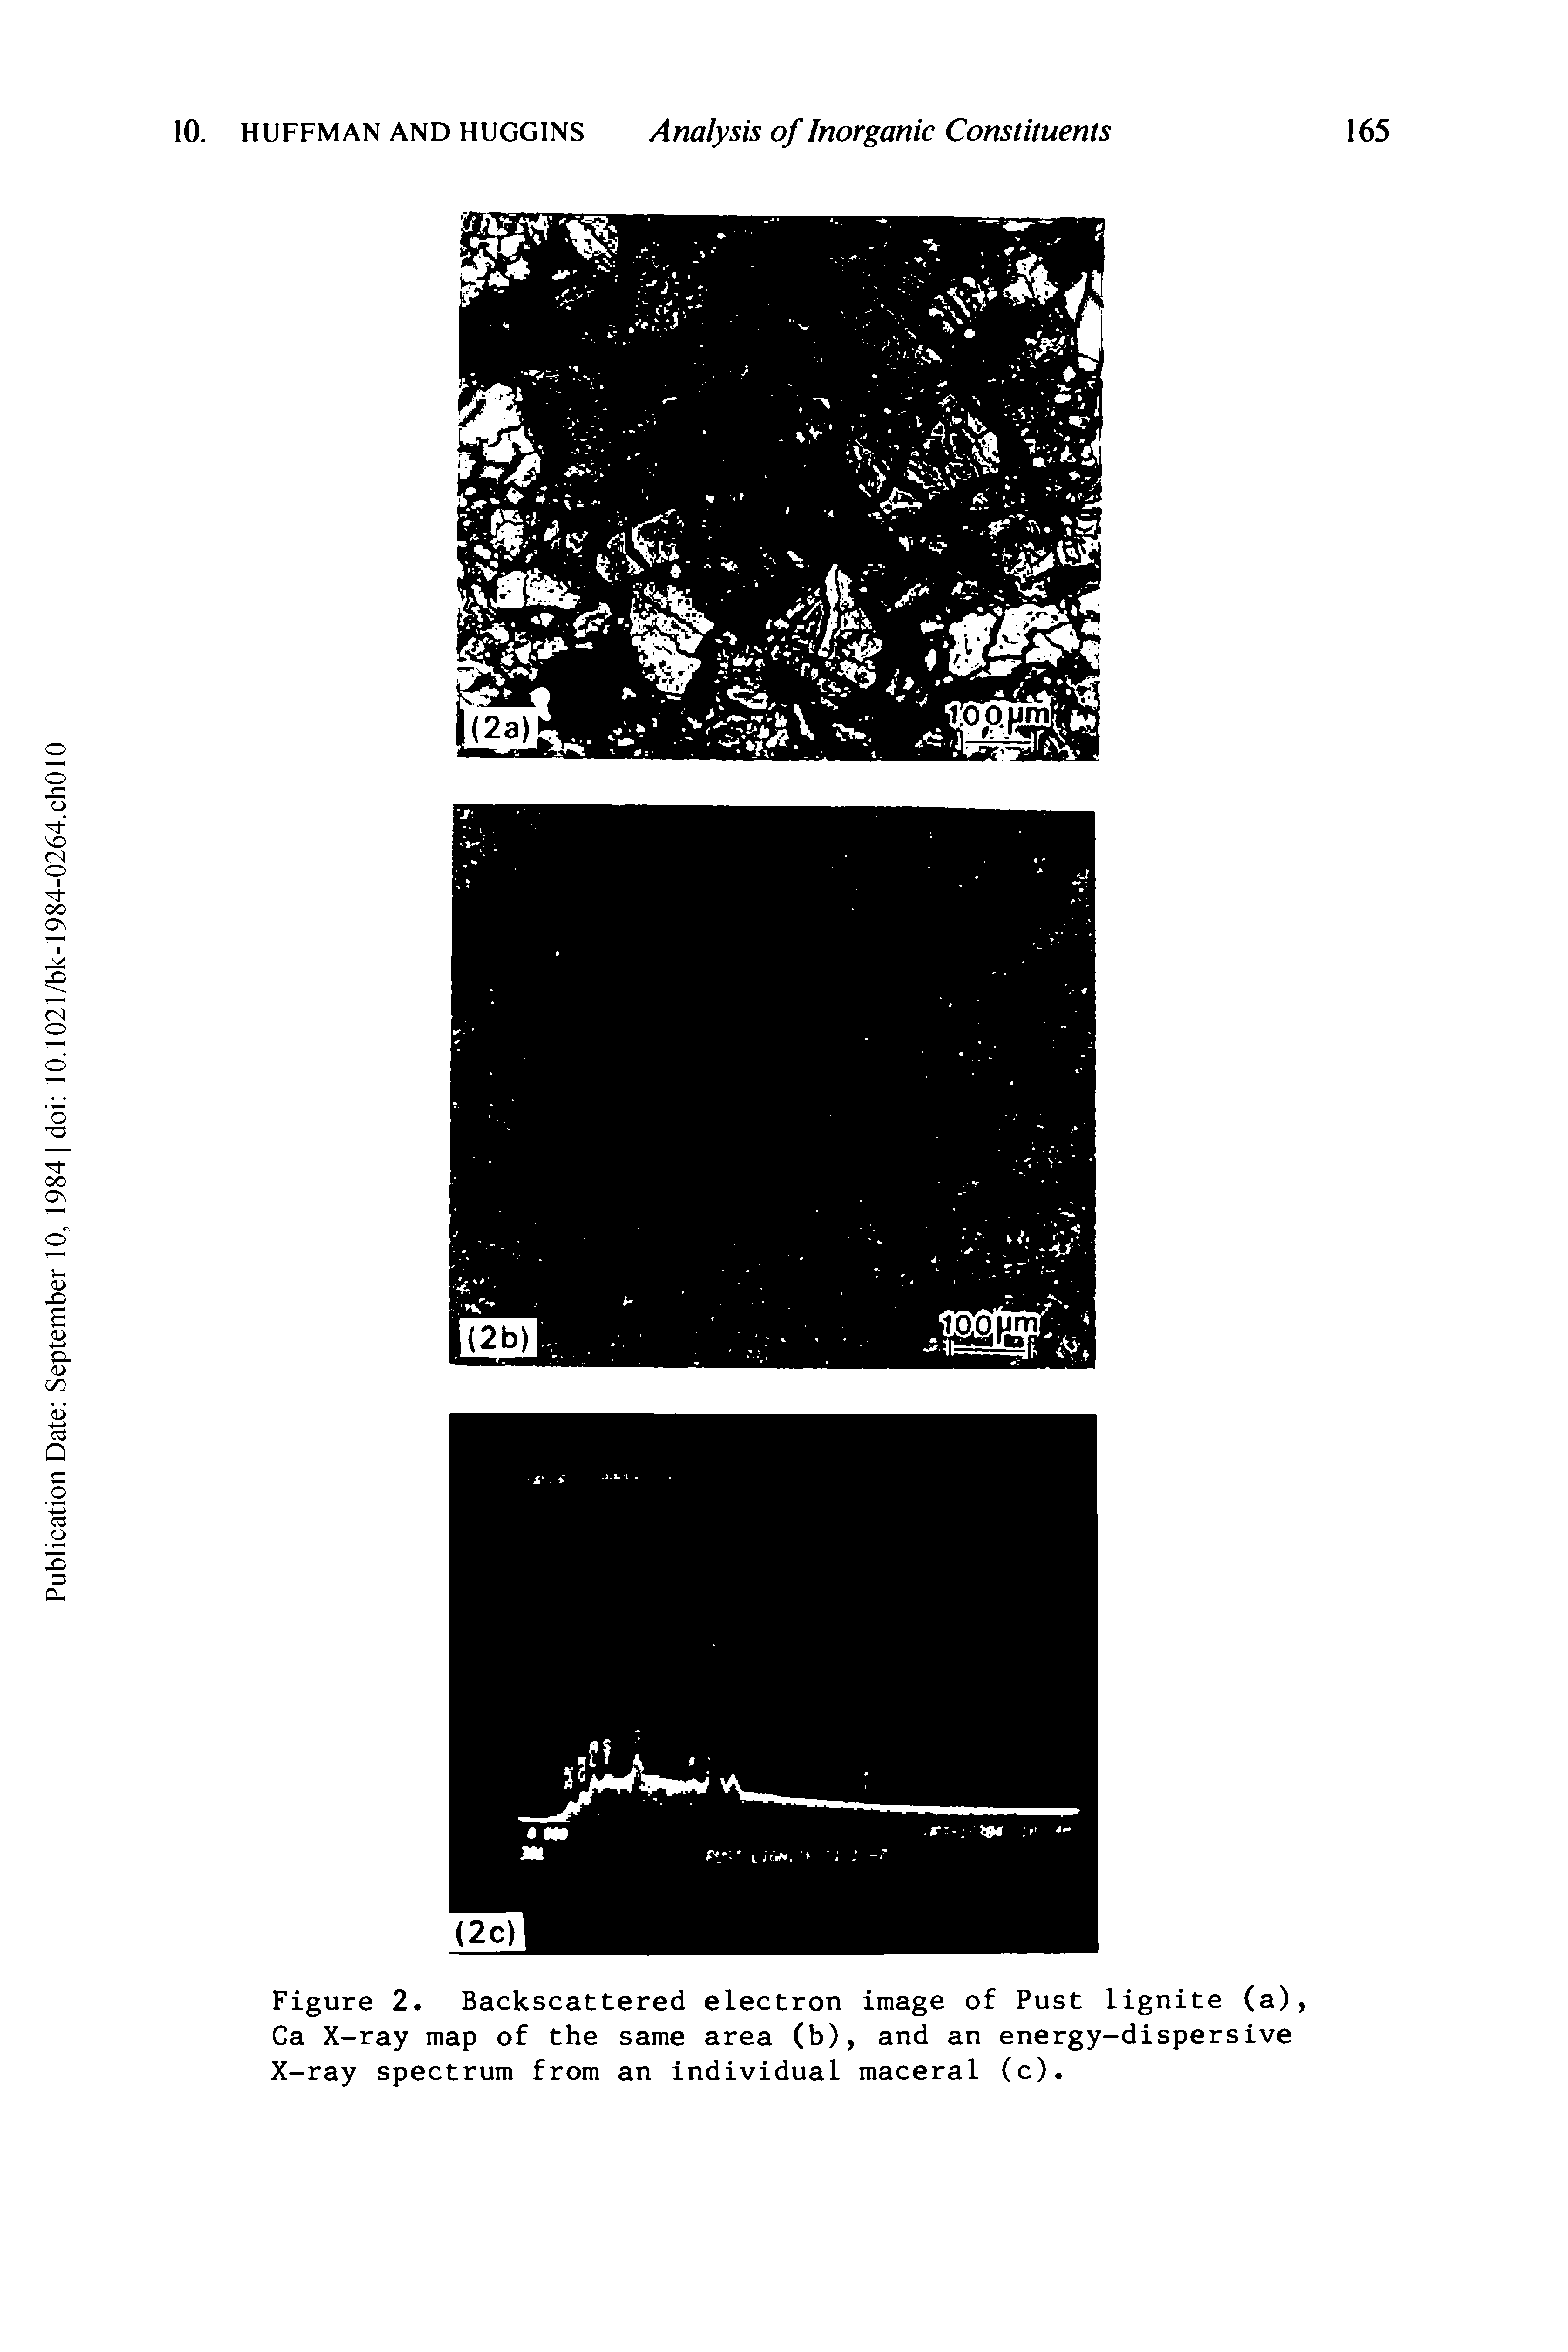 Figure 2. Backscattered electron image of Fust lignite (a), Ca X-ray map of the same area (b), and an energy-dispersive X-ray spectrum from an individual maceral (c).